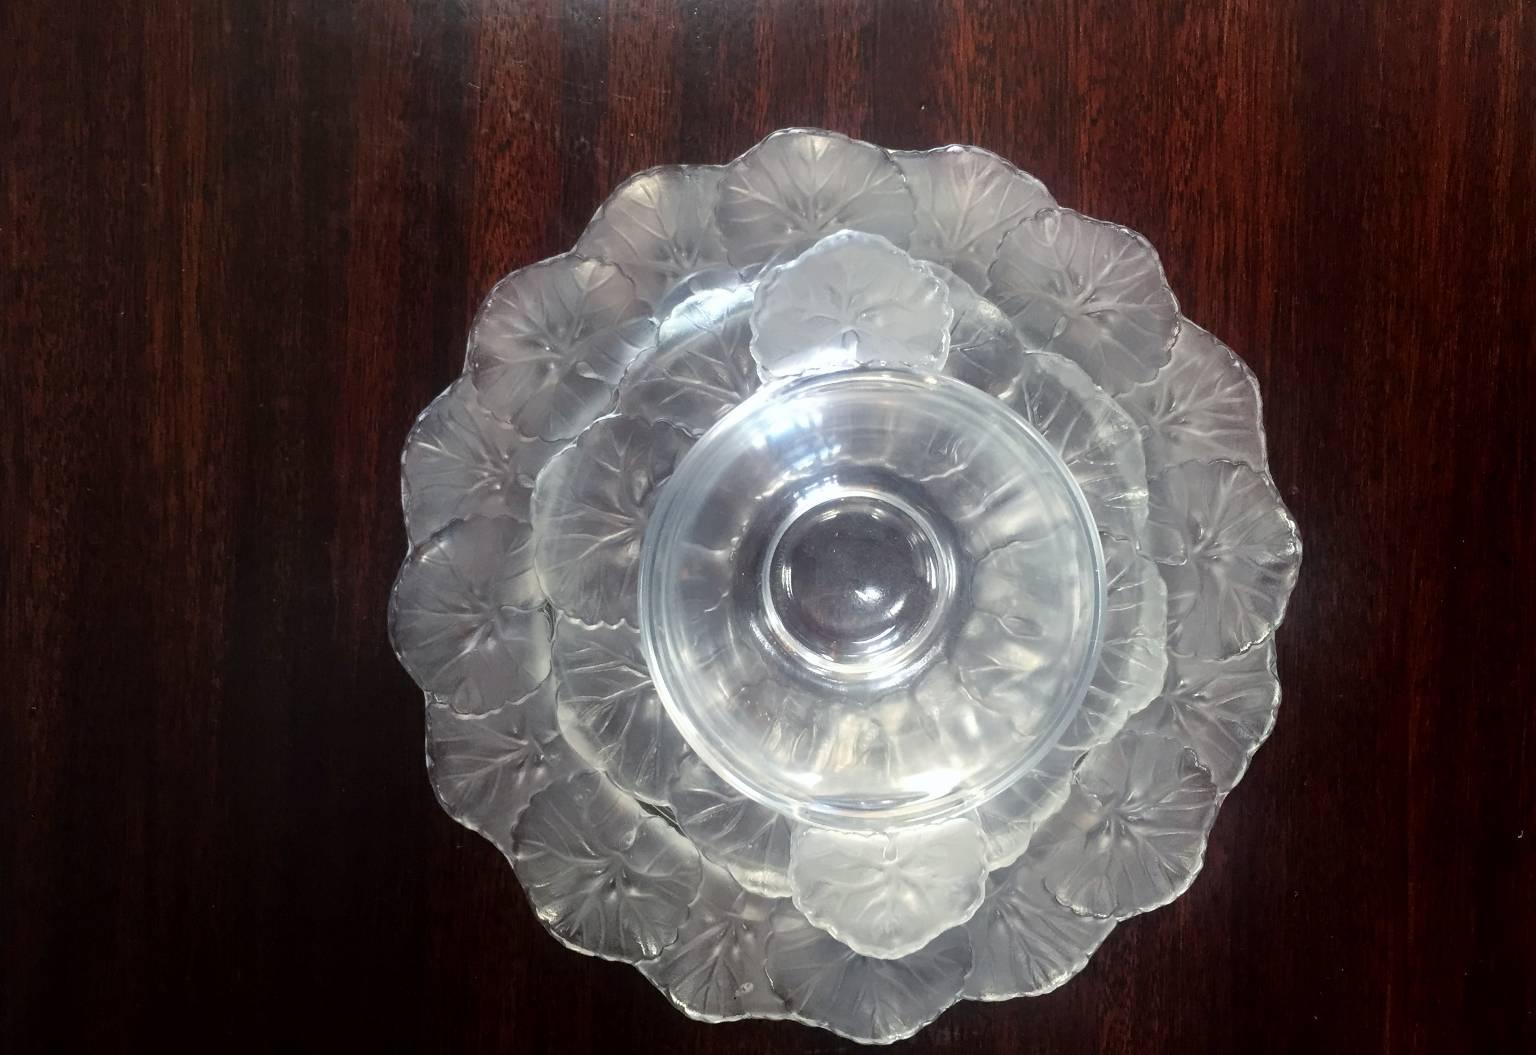 Lalique glass dessert set. The edges of the plates are decorated with leaves, as well as the edge of the small ice cream dish has small leaf handles.
The small bowl is 5.50 D x 2.50 H.
The small plate is 6